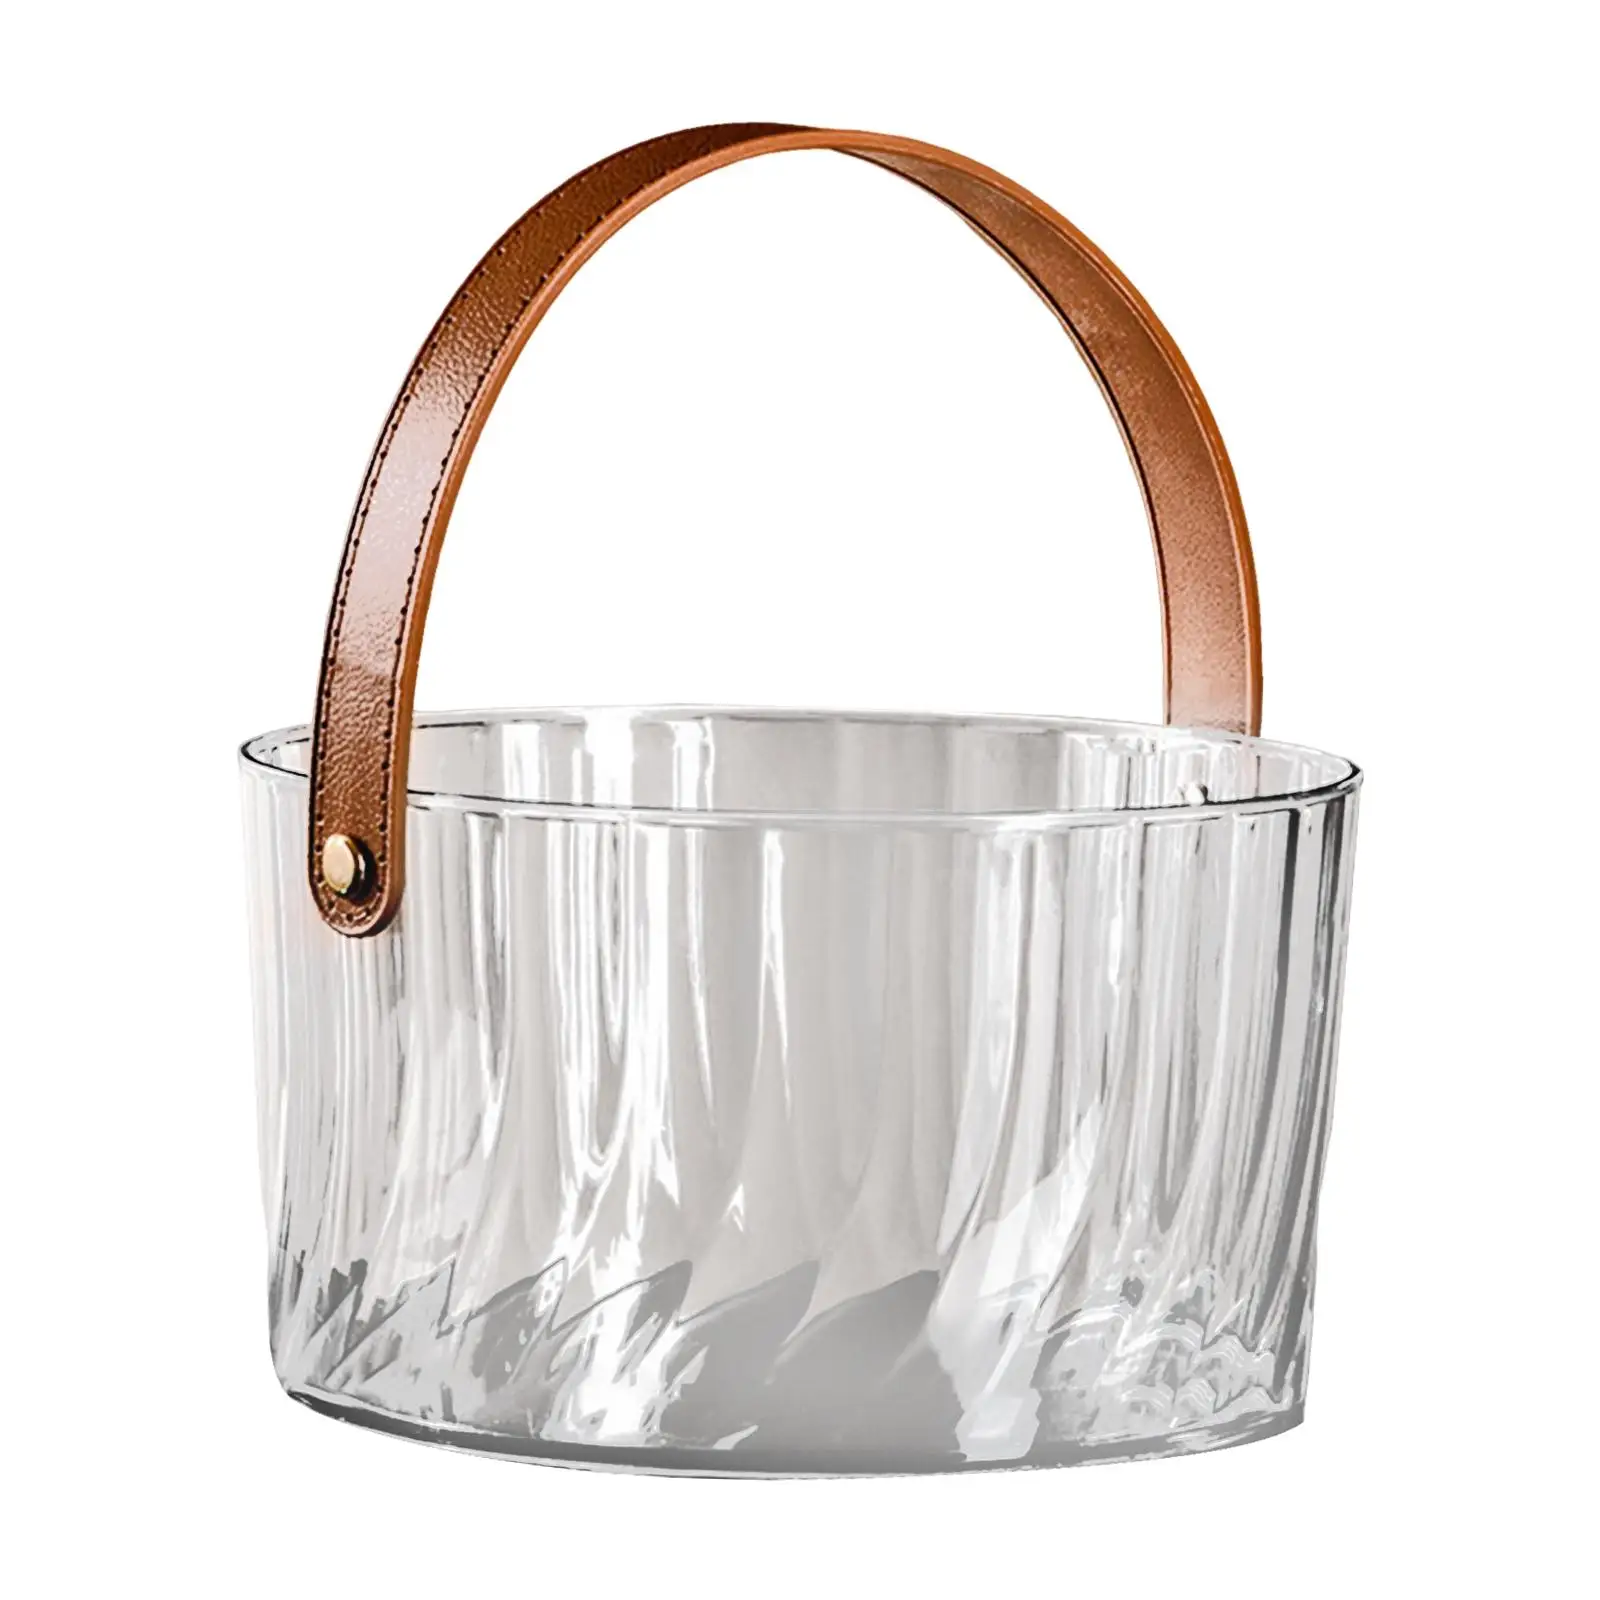 Ice Bucket Large Capacity Easy to Carry Durable Drink Tub Clear for Cocktail Parties Home Champagne Bottles KTV Clubs